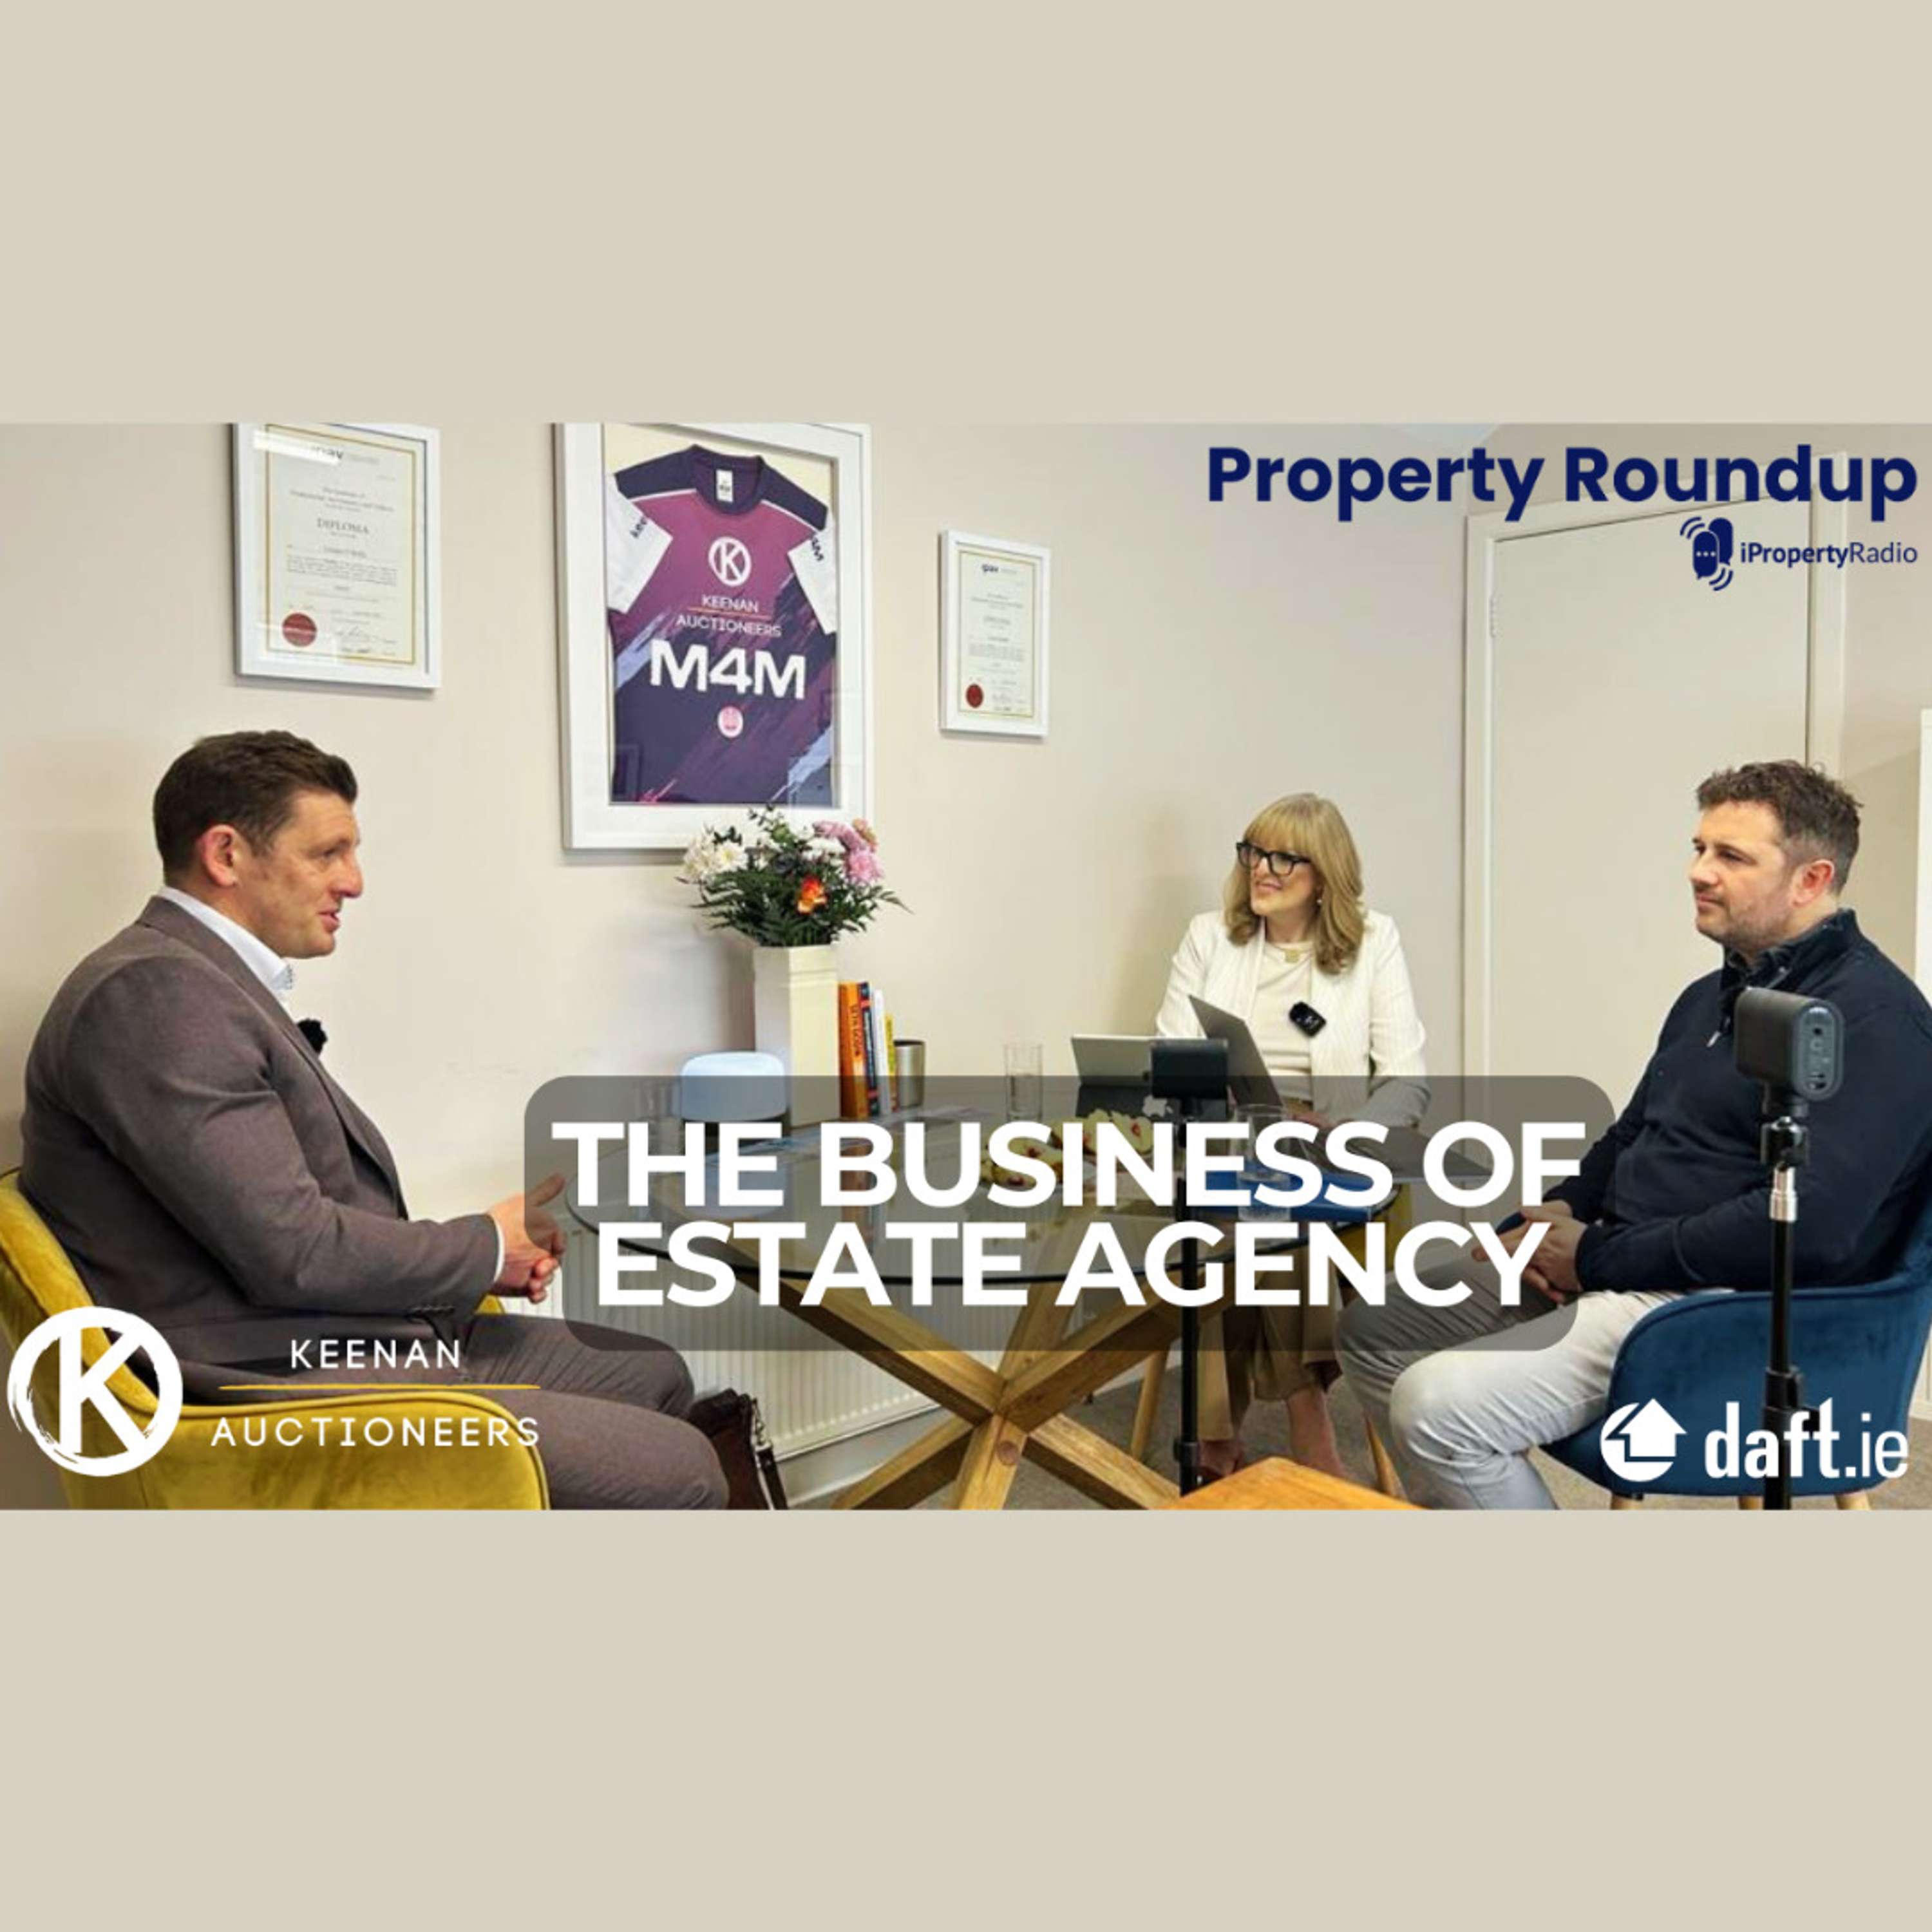 The Business of Estate Agency